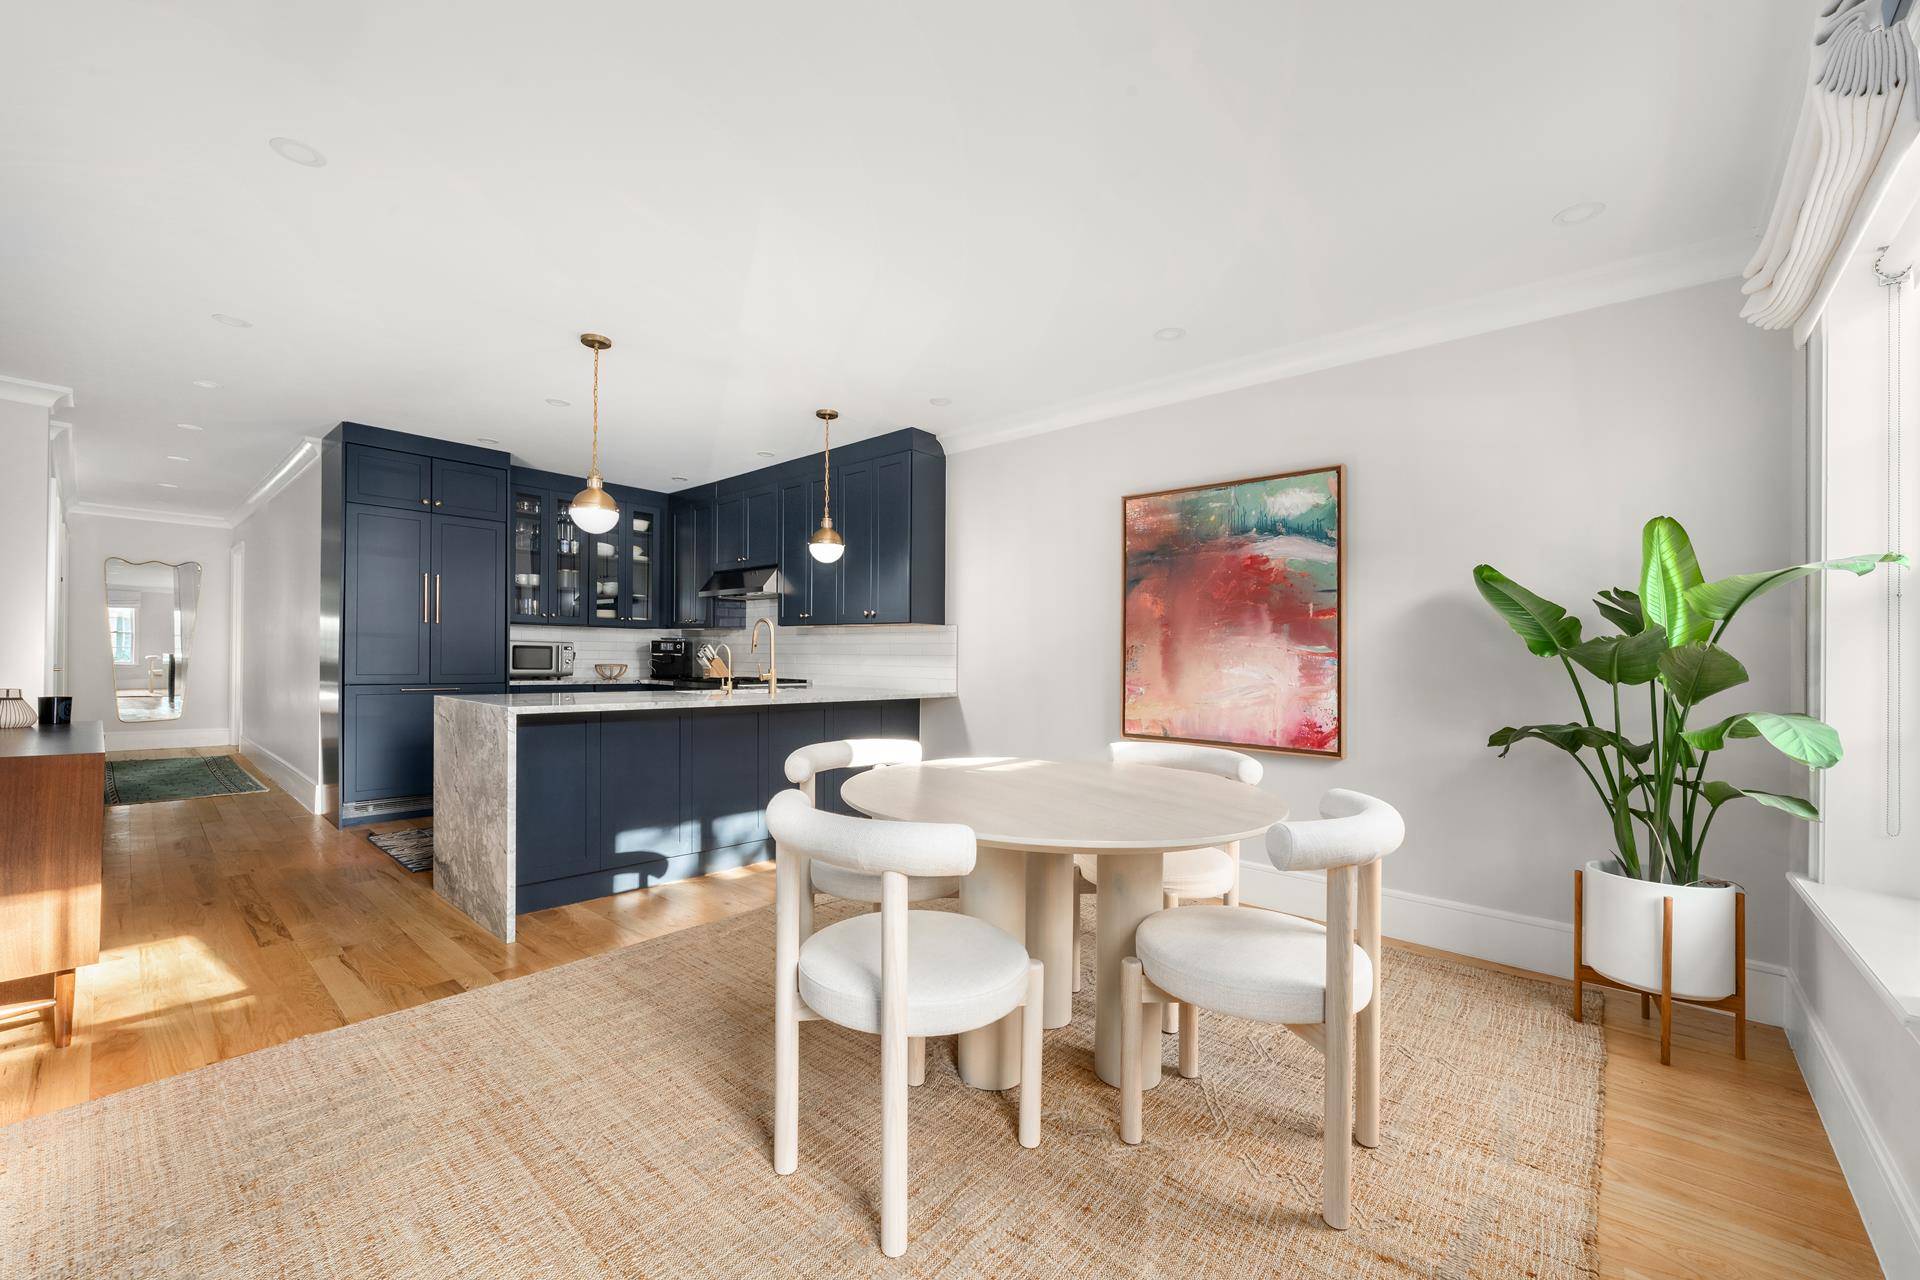 Nestled on one of Cobble Hill's most coveted blocks, 23 Wyckoff Street 1 is a newly renovated condominium residence in a magnificently reimagined townhouse.